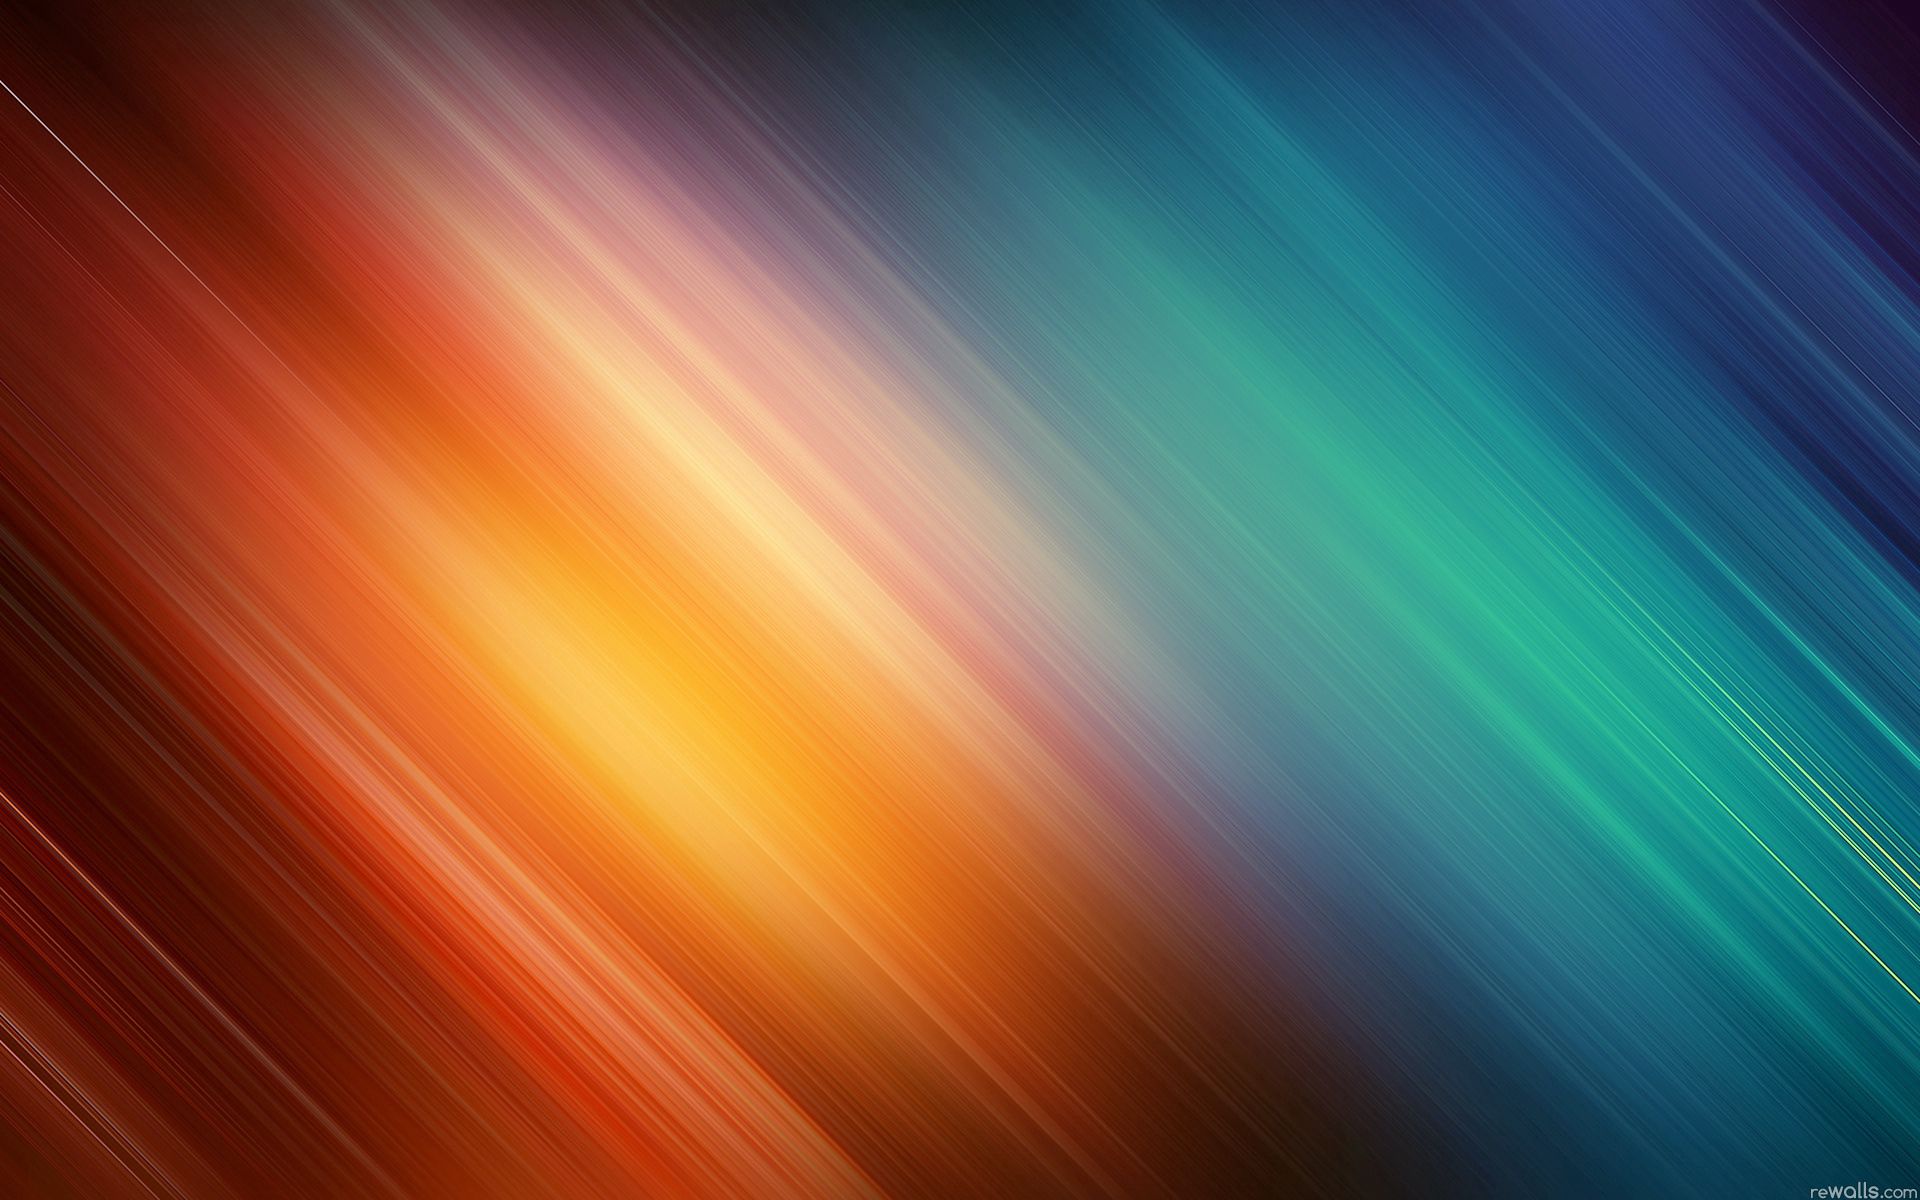 bright, abstract, shine, light, lines, obliquely